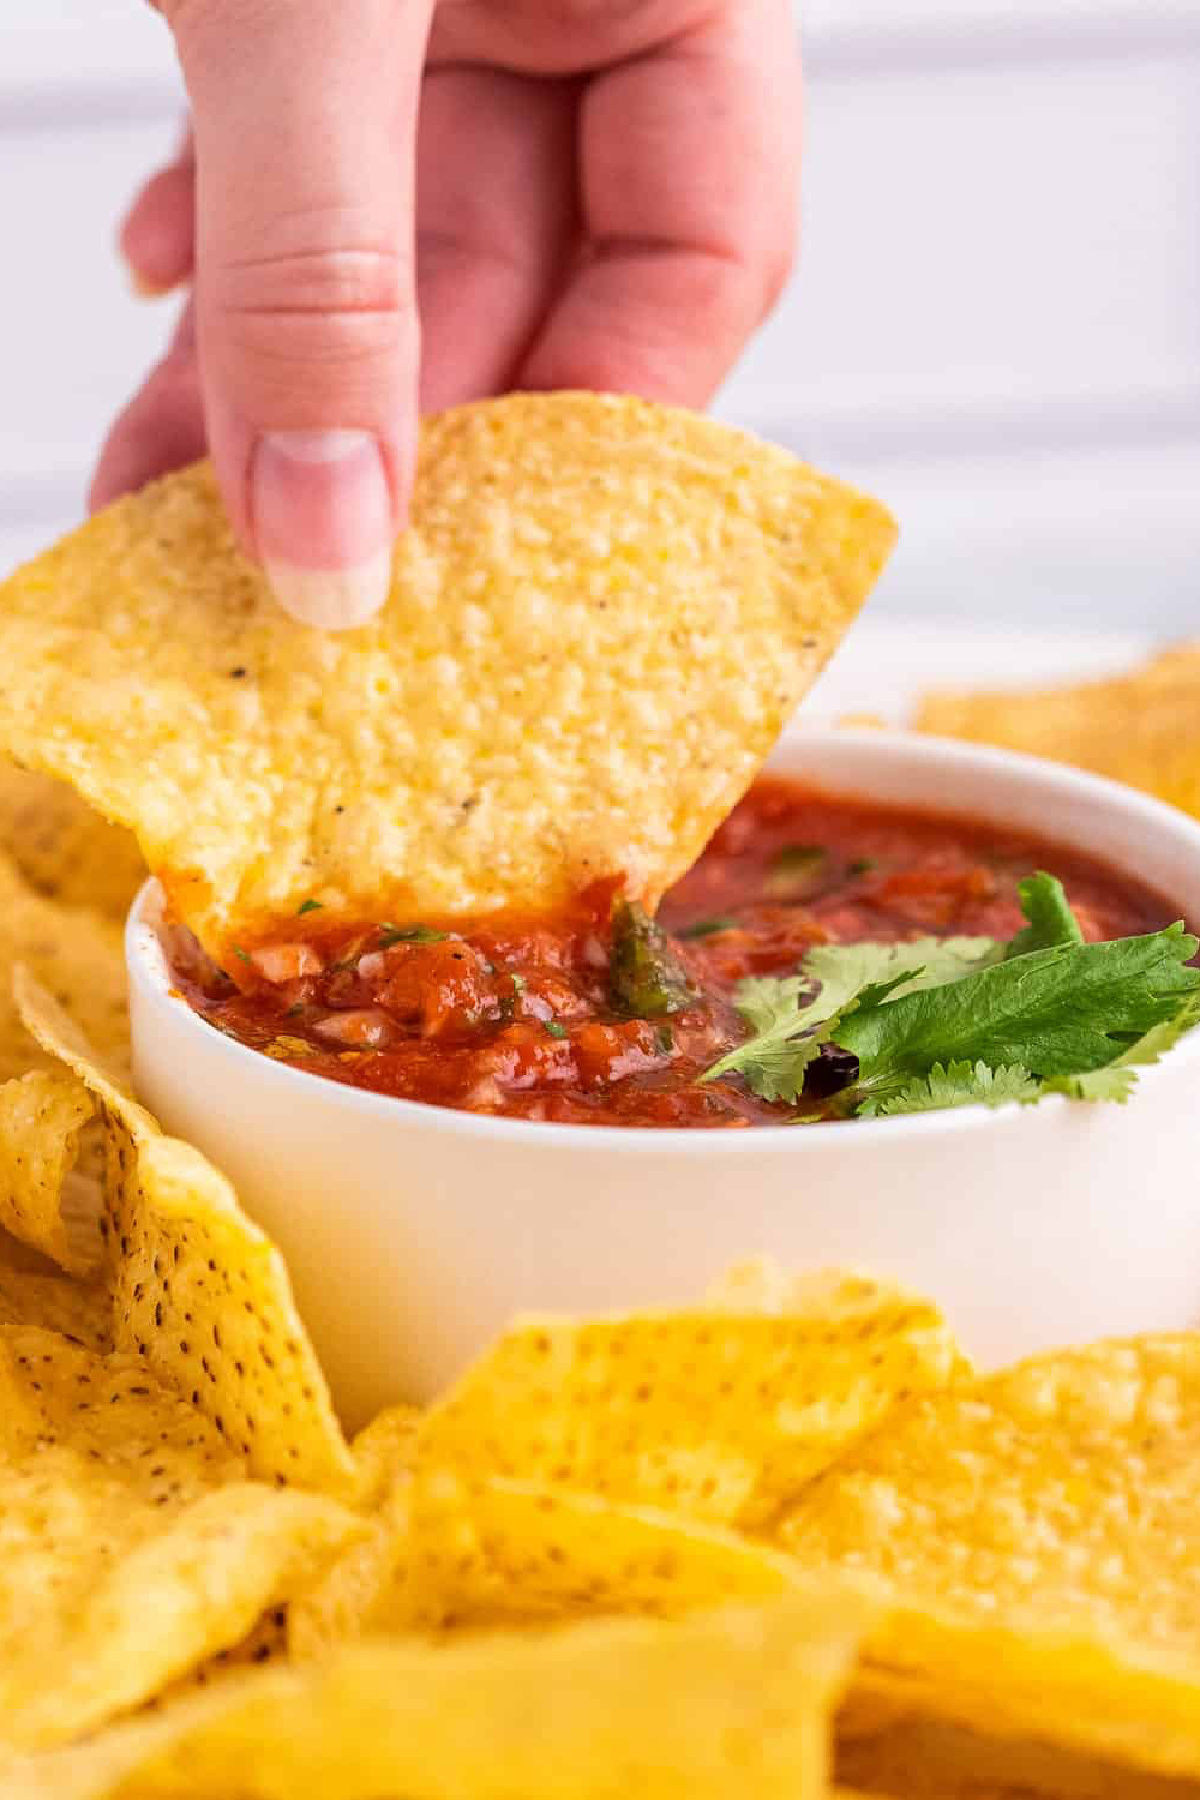 Chips and Salsa - a tasty and cheap party food idea